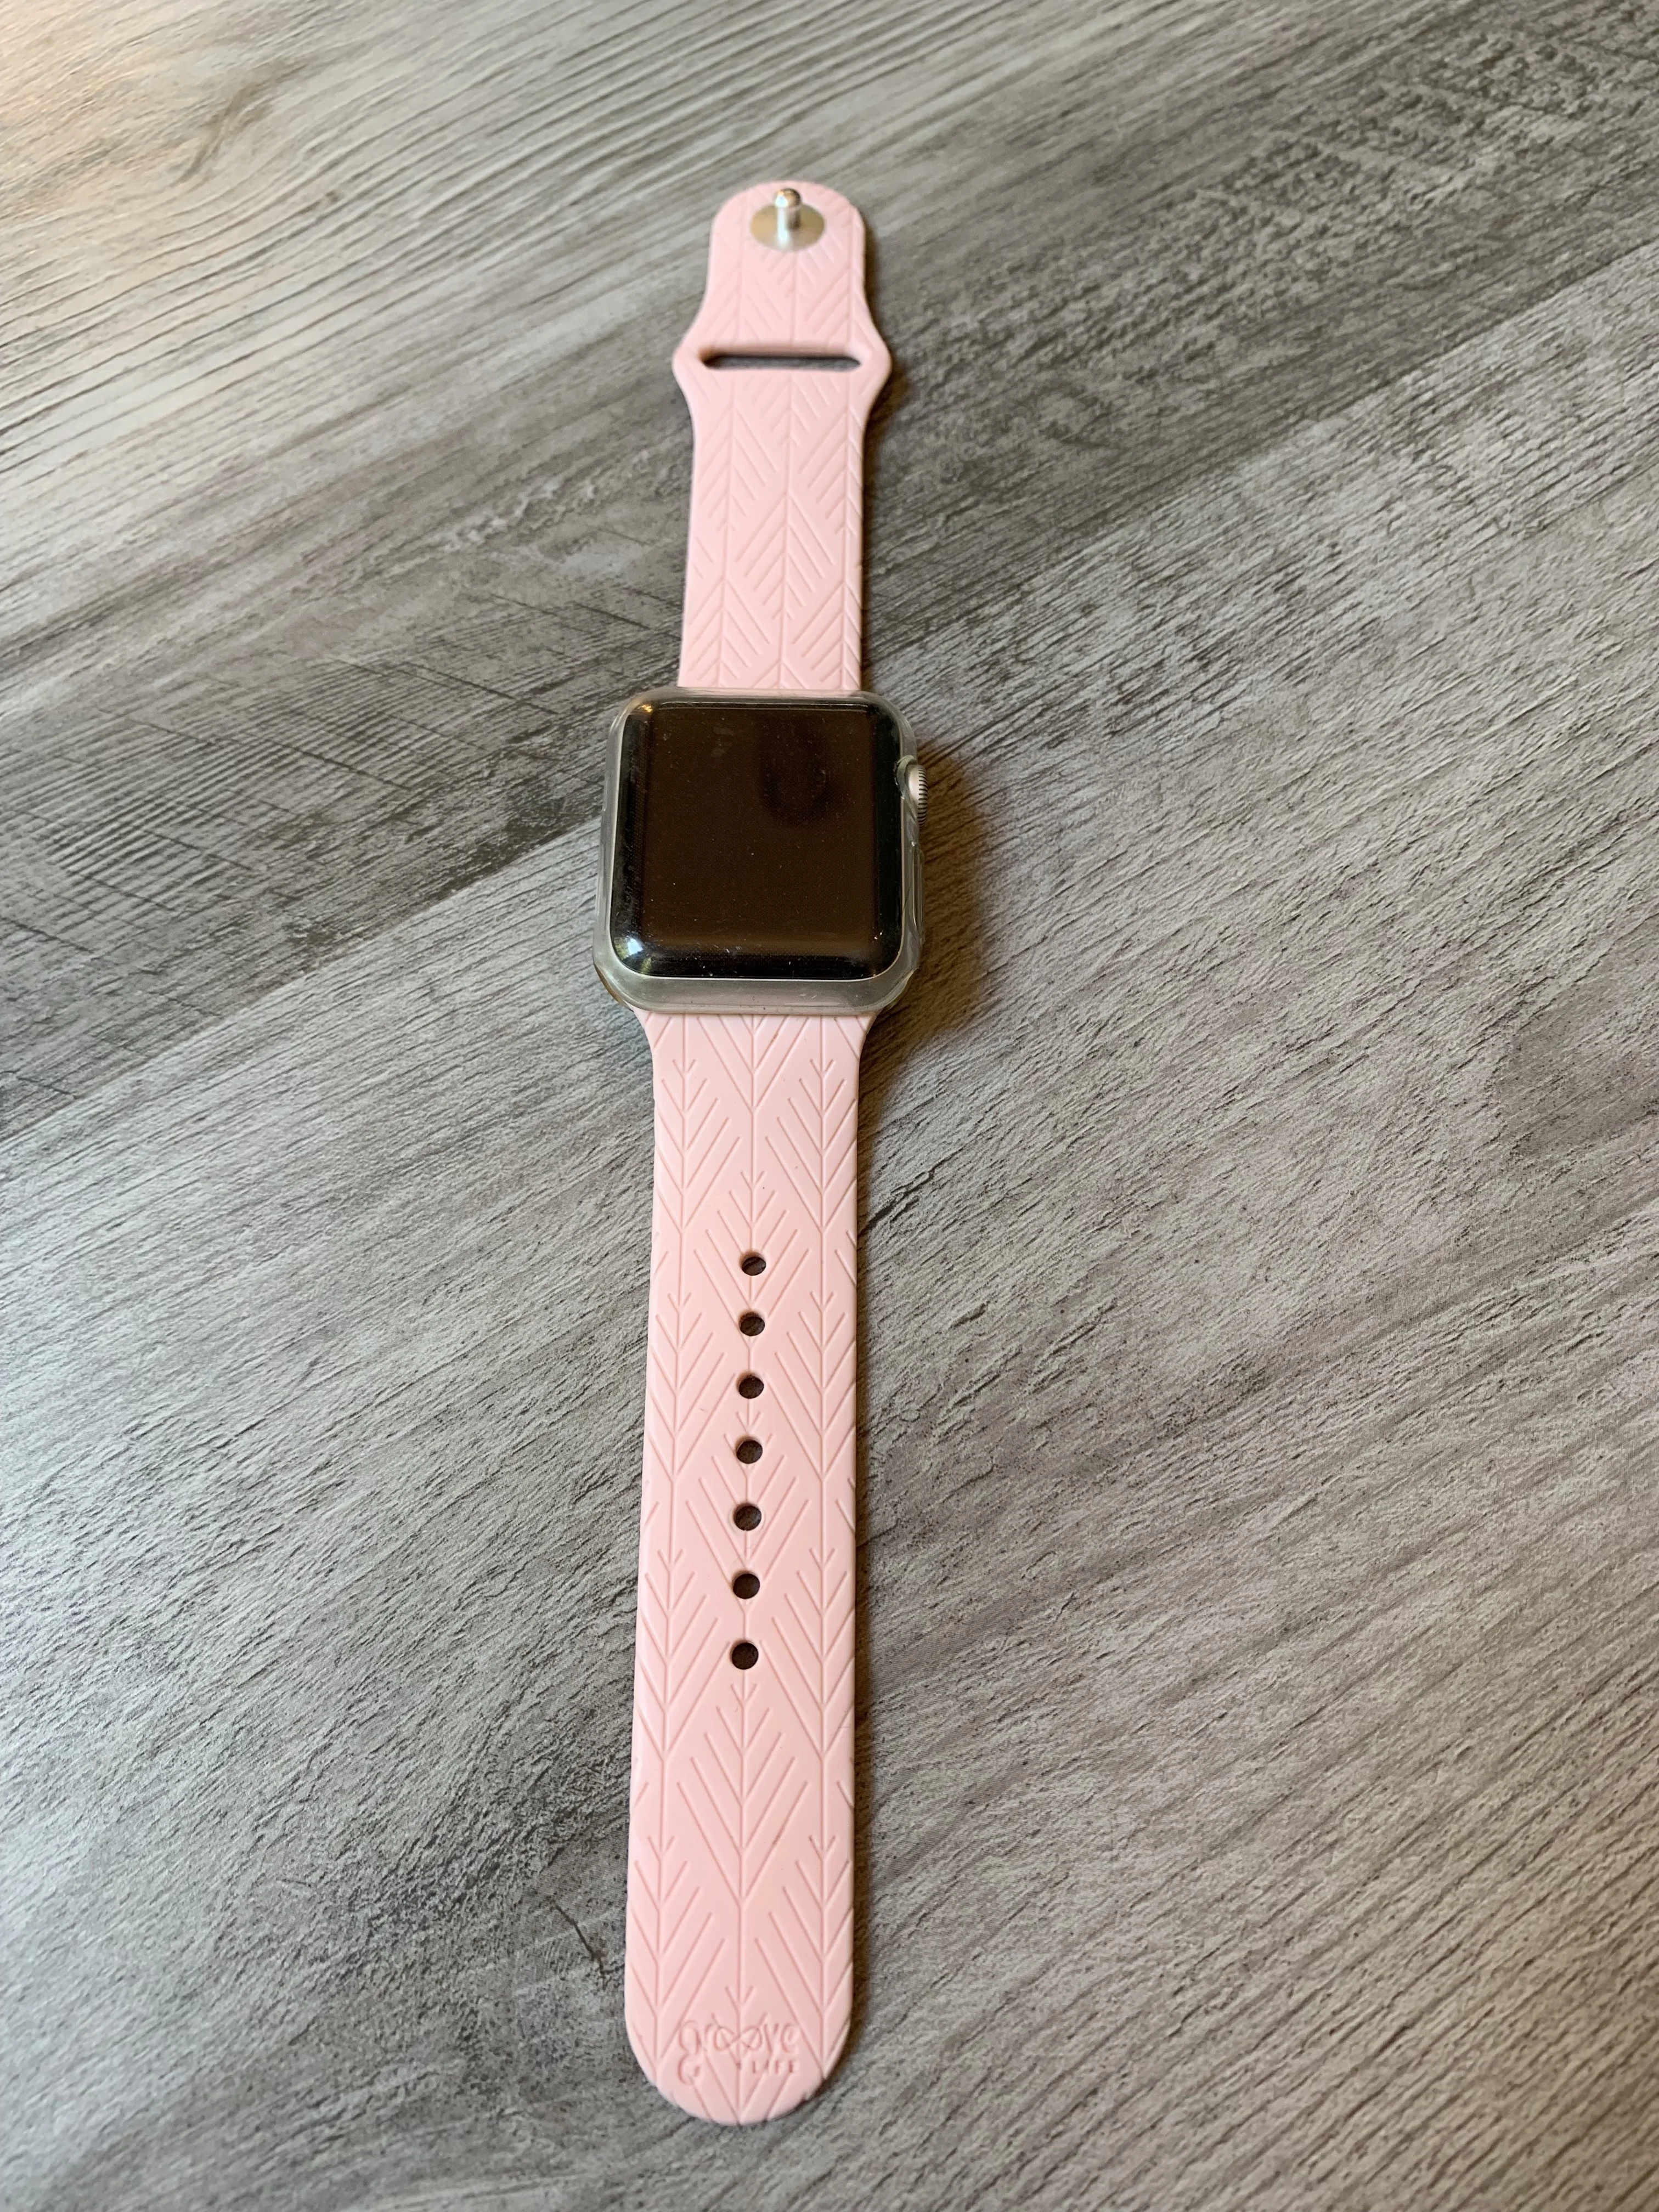 Groove Life Apple Watch Bands: Comfortable and Durable!